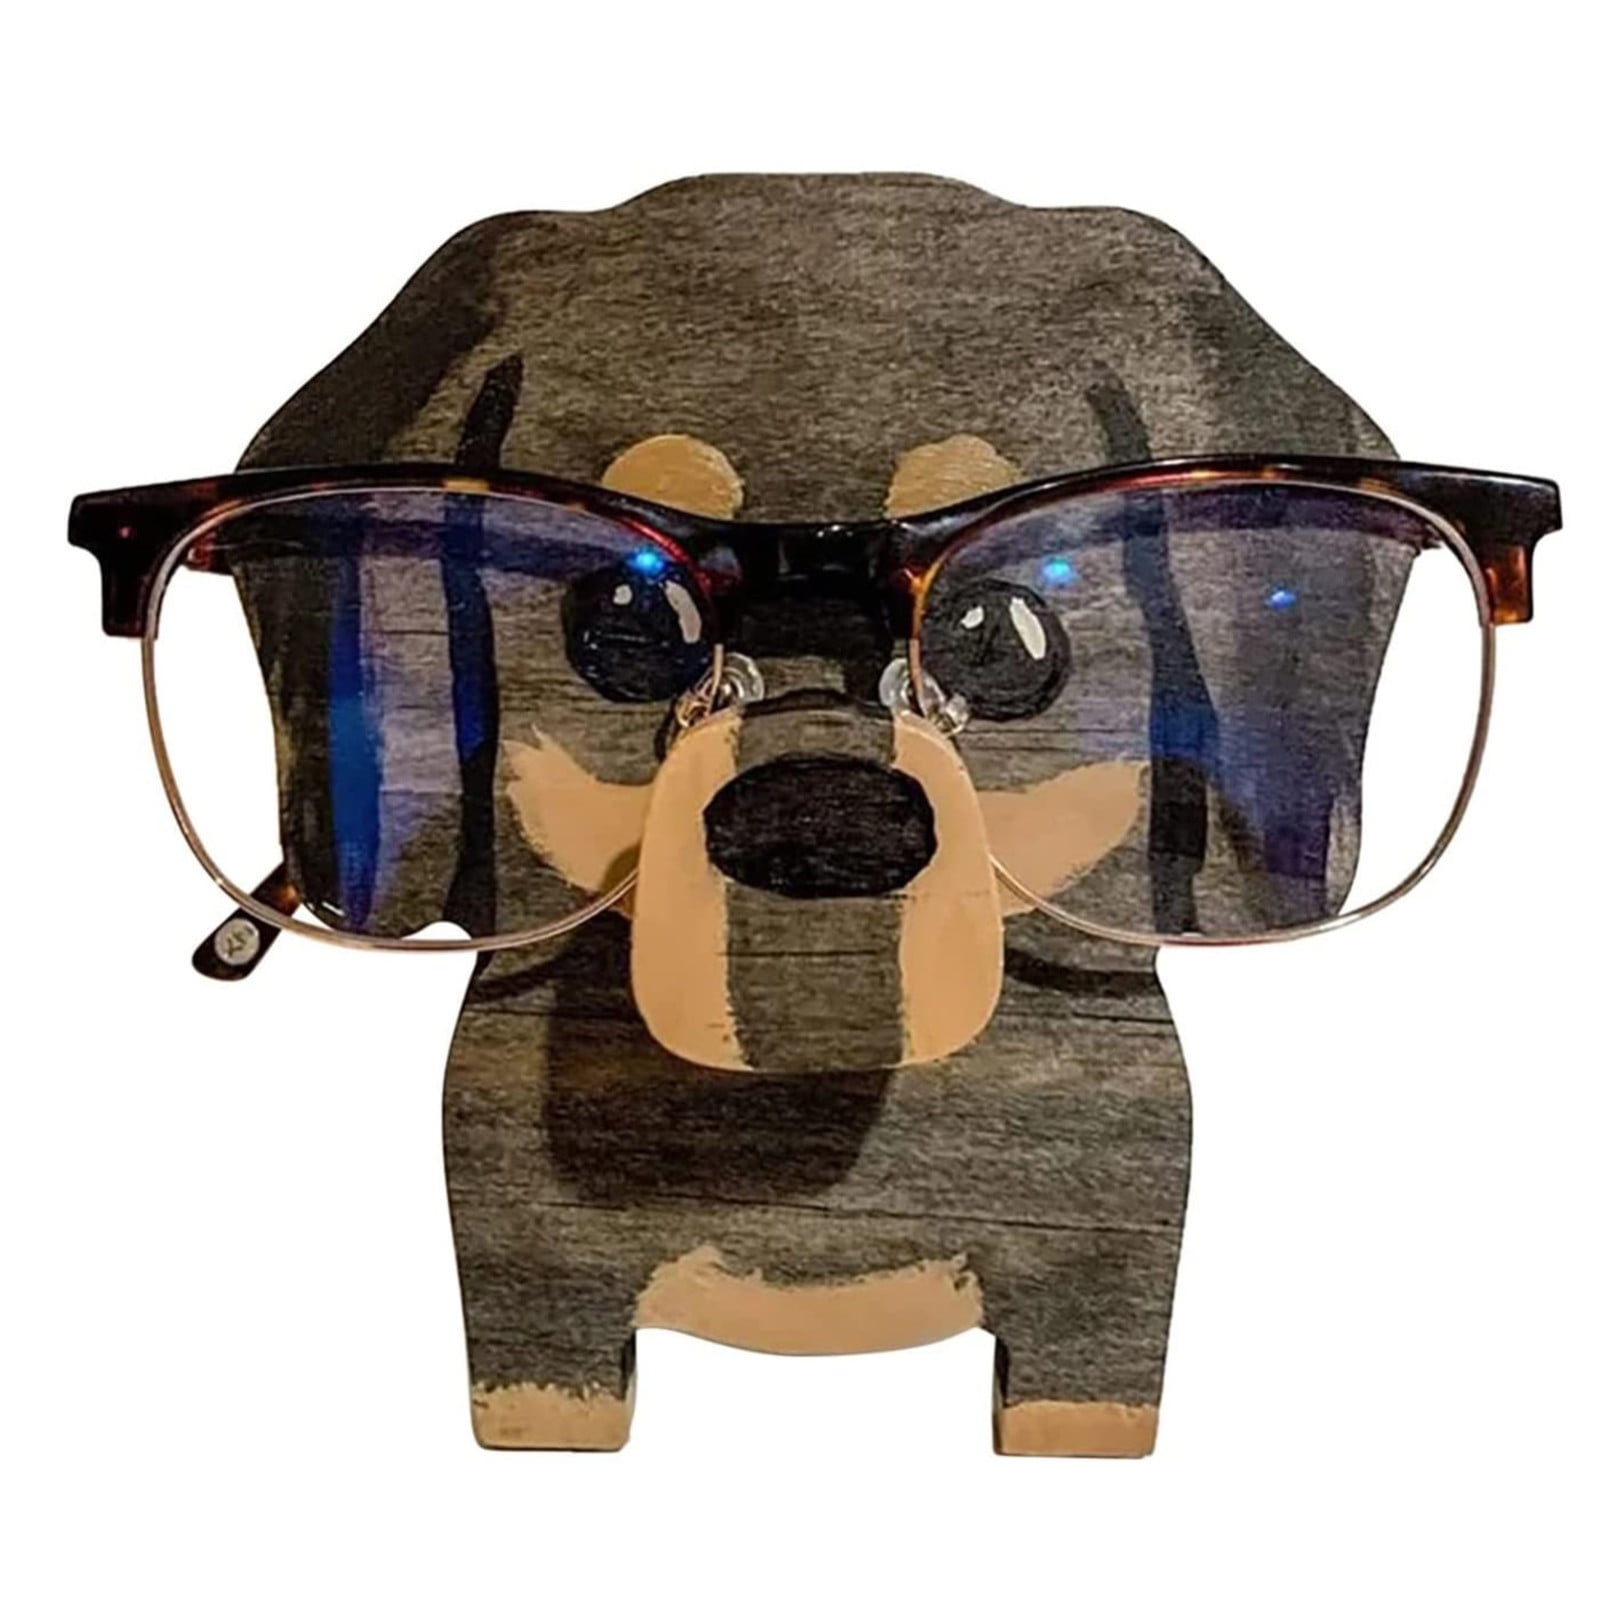 Keweis Creative Glasses Holder Stand, Cute Animal Handmade Wooden Carving  Eyeglass Holder, Sunglasses Spectacle Display Rack for Home, Office, Desk